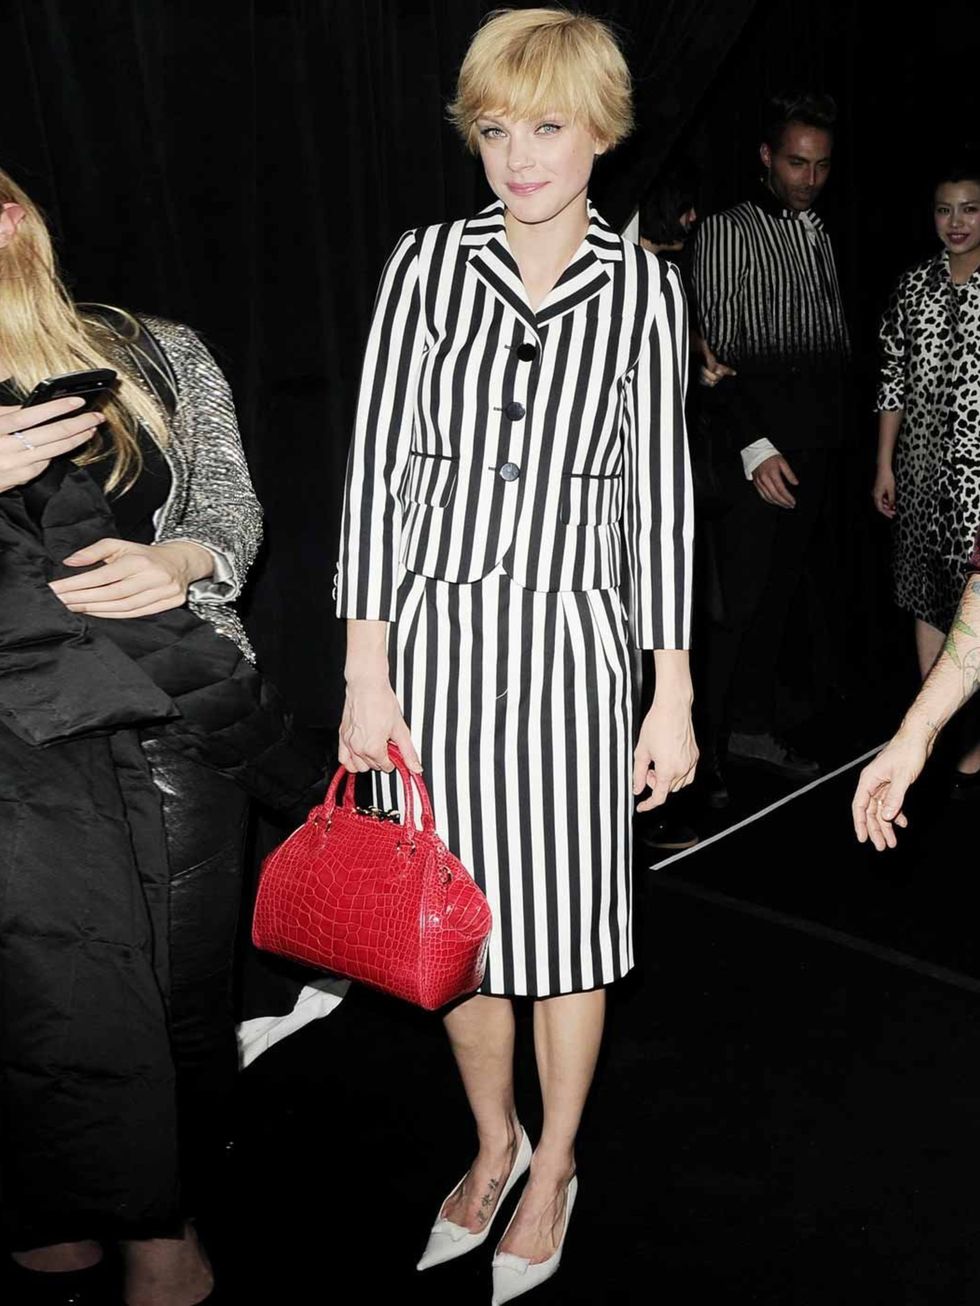 <p>Jessica Stam attends the Marc Jacobs show for new York Fashion Week wearing a <a href="http://www.elleuk.com/catwalk/designer-a-z/marc-jacobs/spring-summer-2013/collection">Marc Jacobs</a> suit, February 2013.</p>